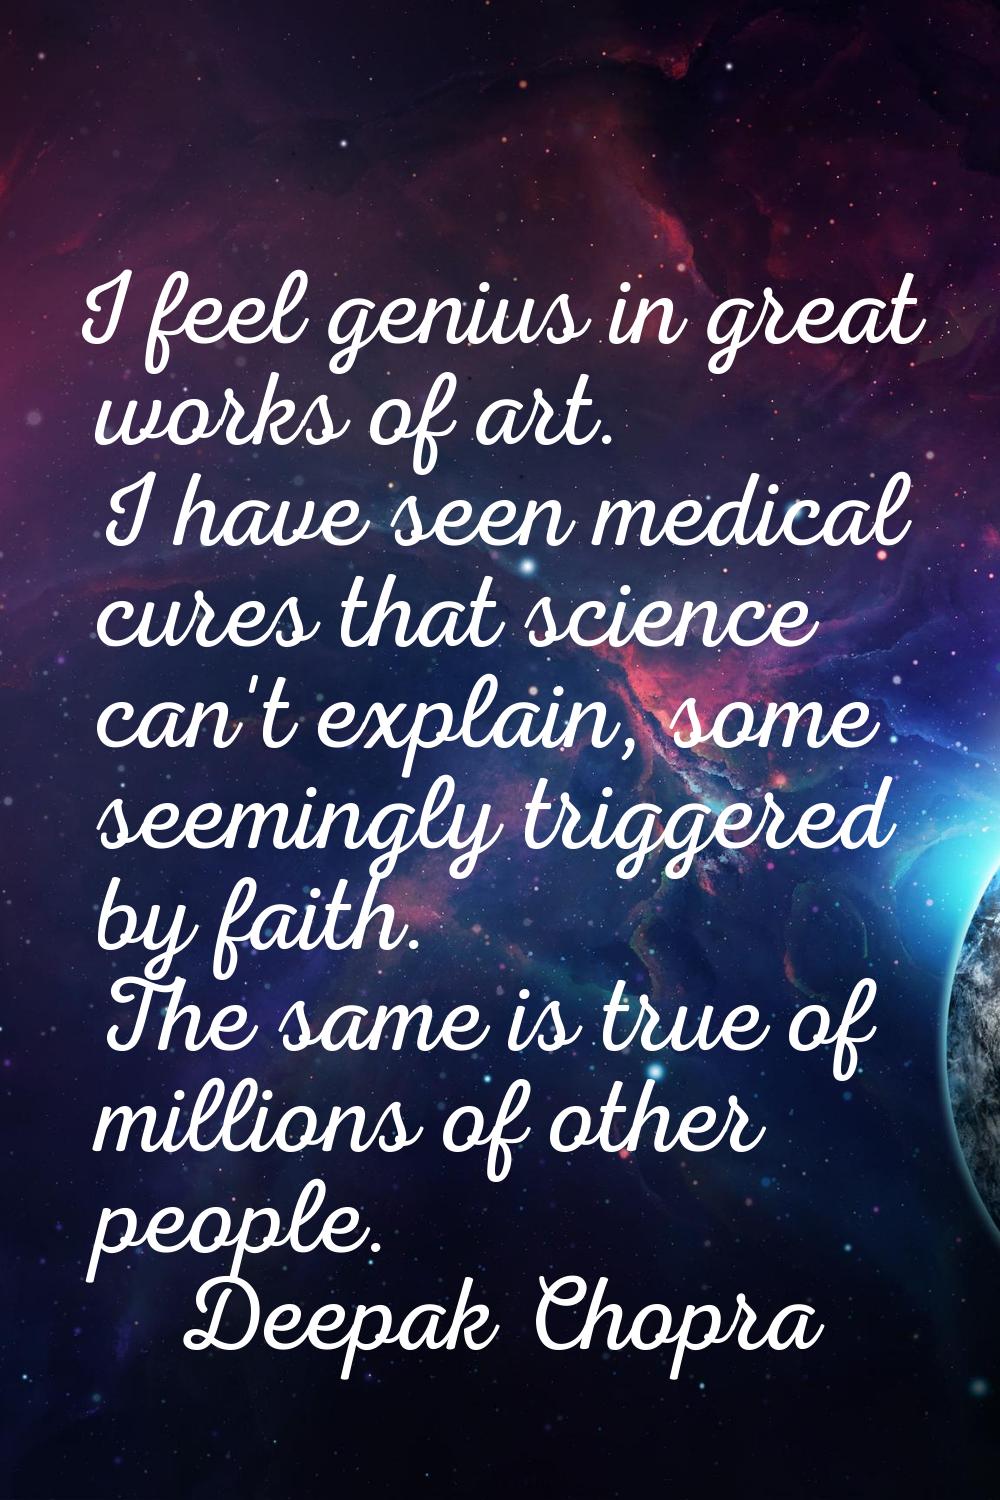 I feel genius in great works of art. I have seen medical cures that science can't explain, some see